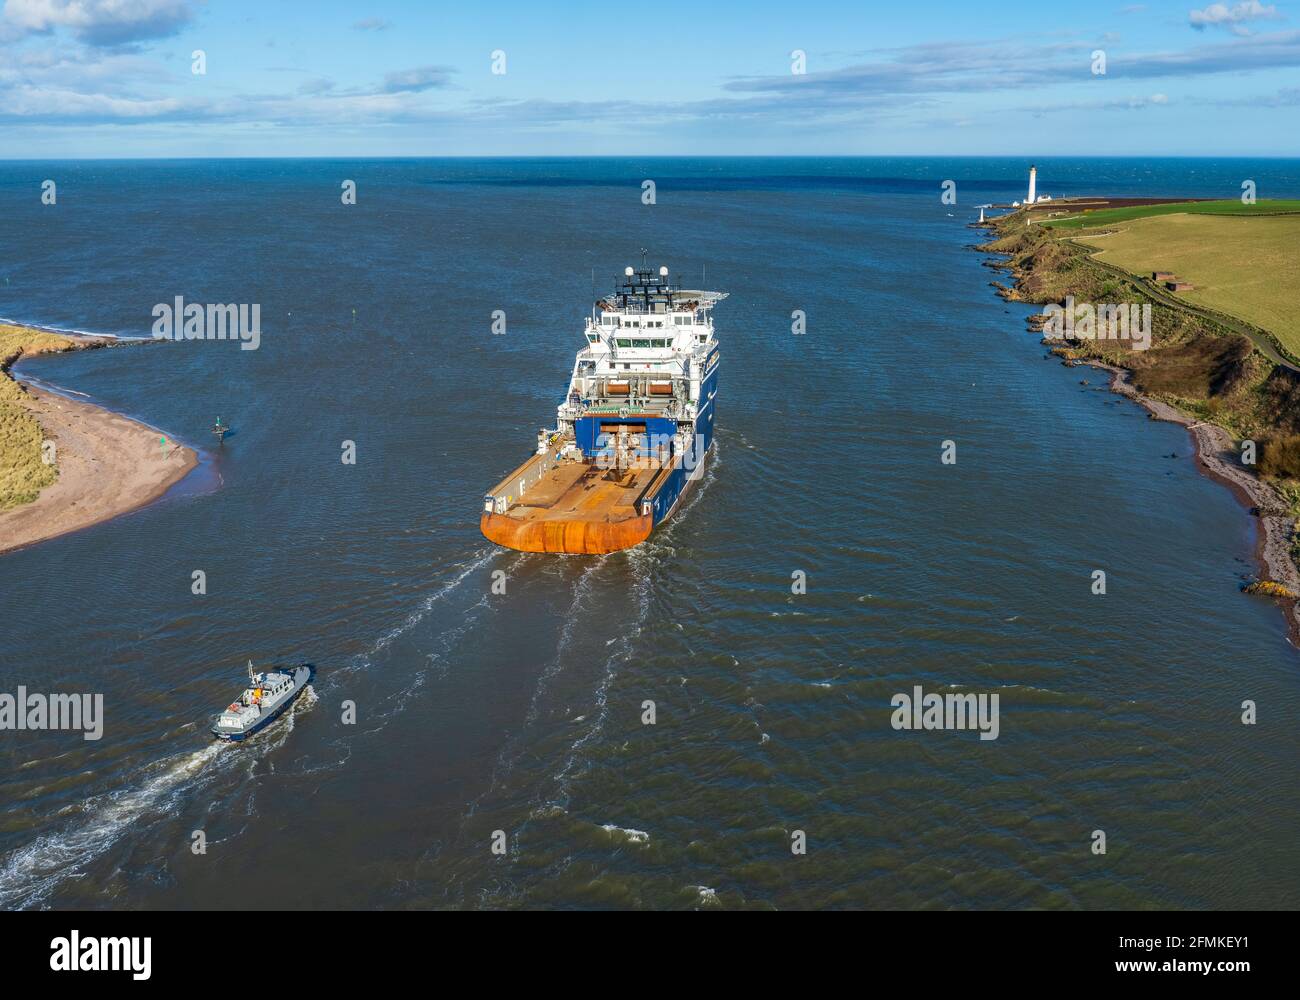 Montrose, Angus, Scotland, UK, 31st of Mar 2017: Offshore support vessel leaving the port of Montrose, oncourse for a North Sea oil rig. Stock Photo